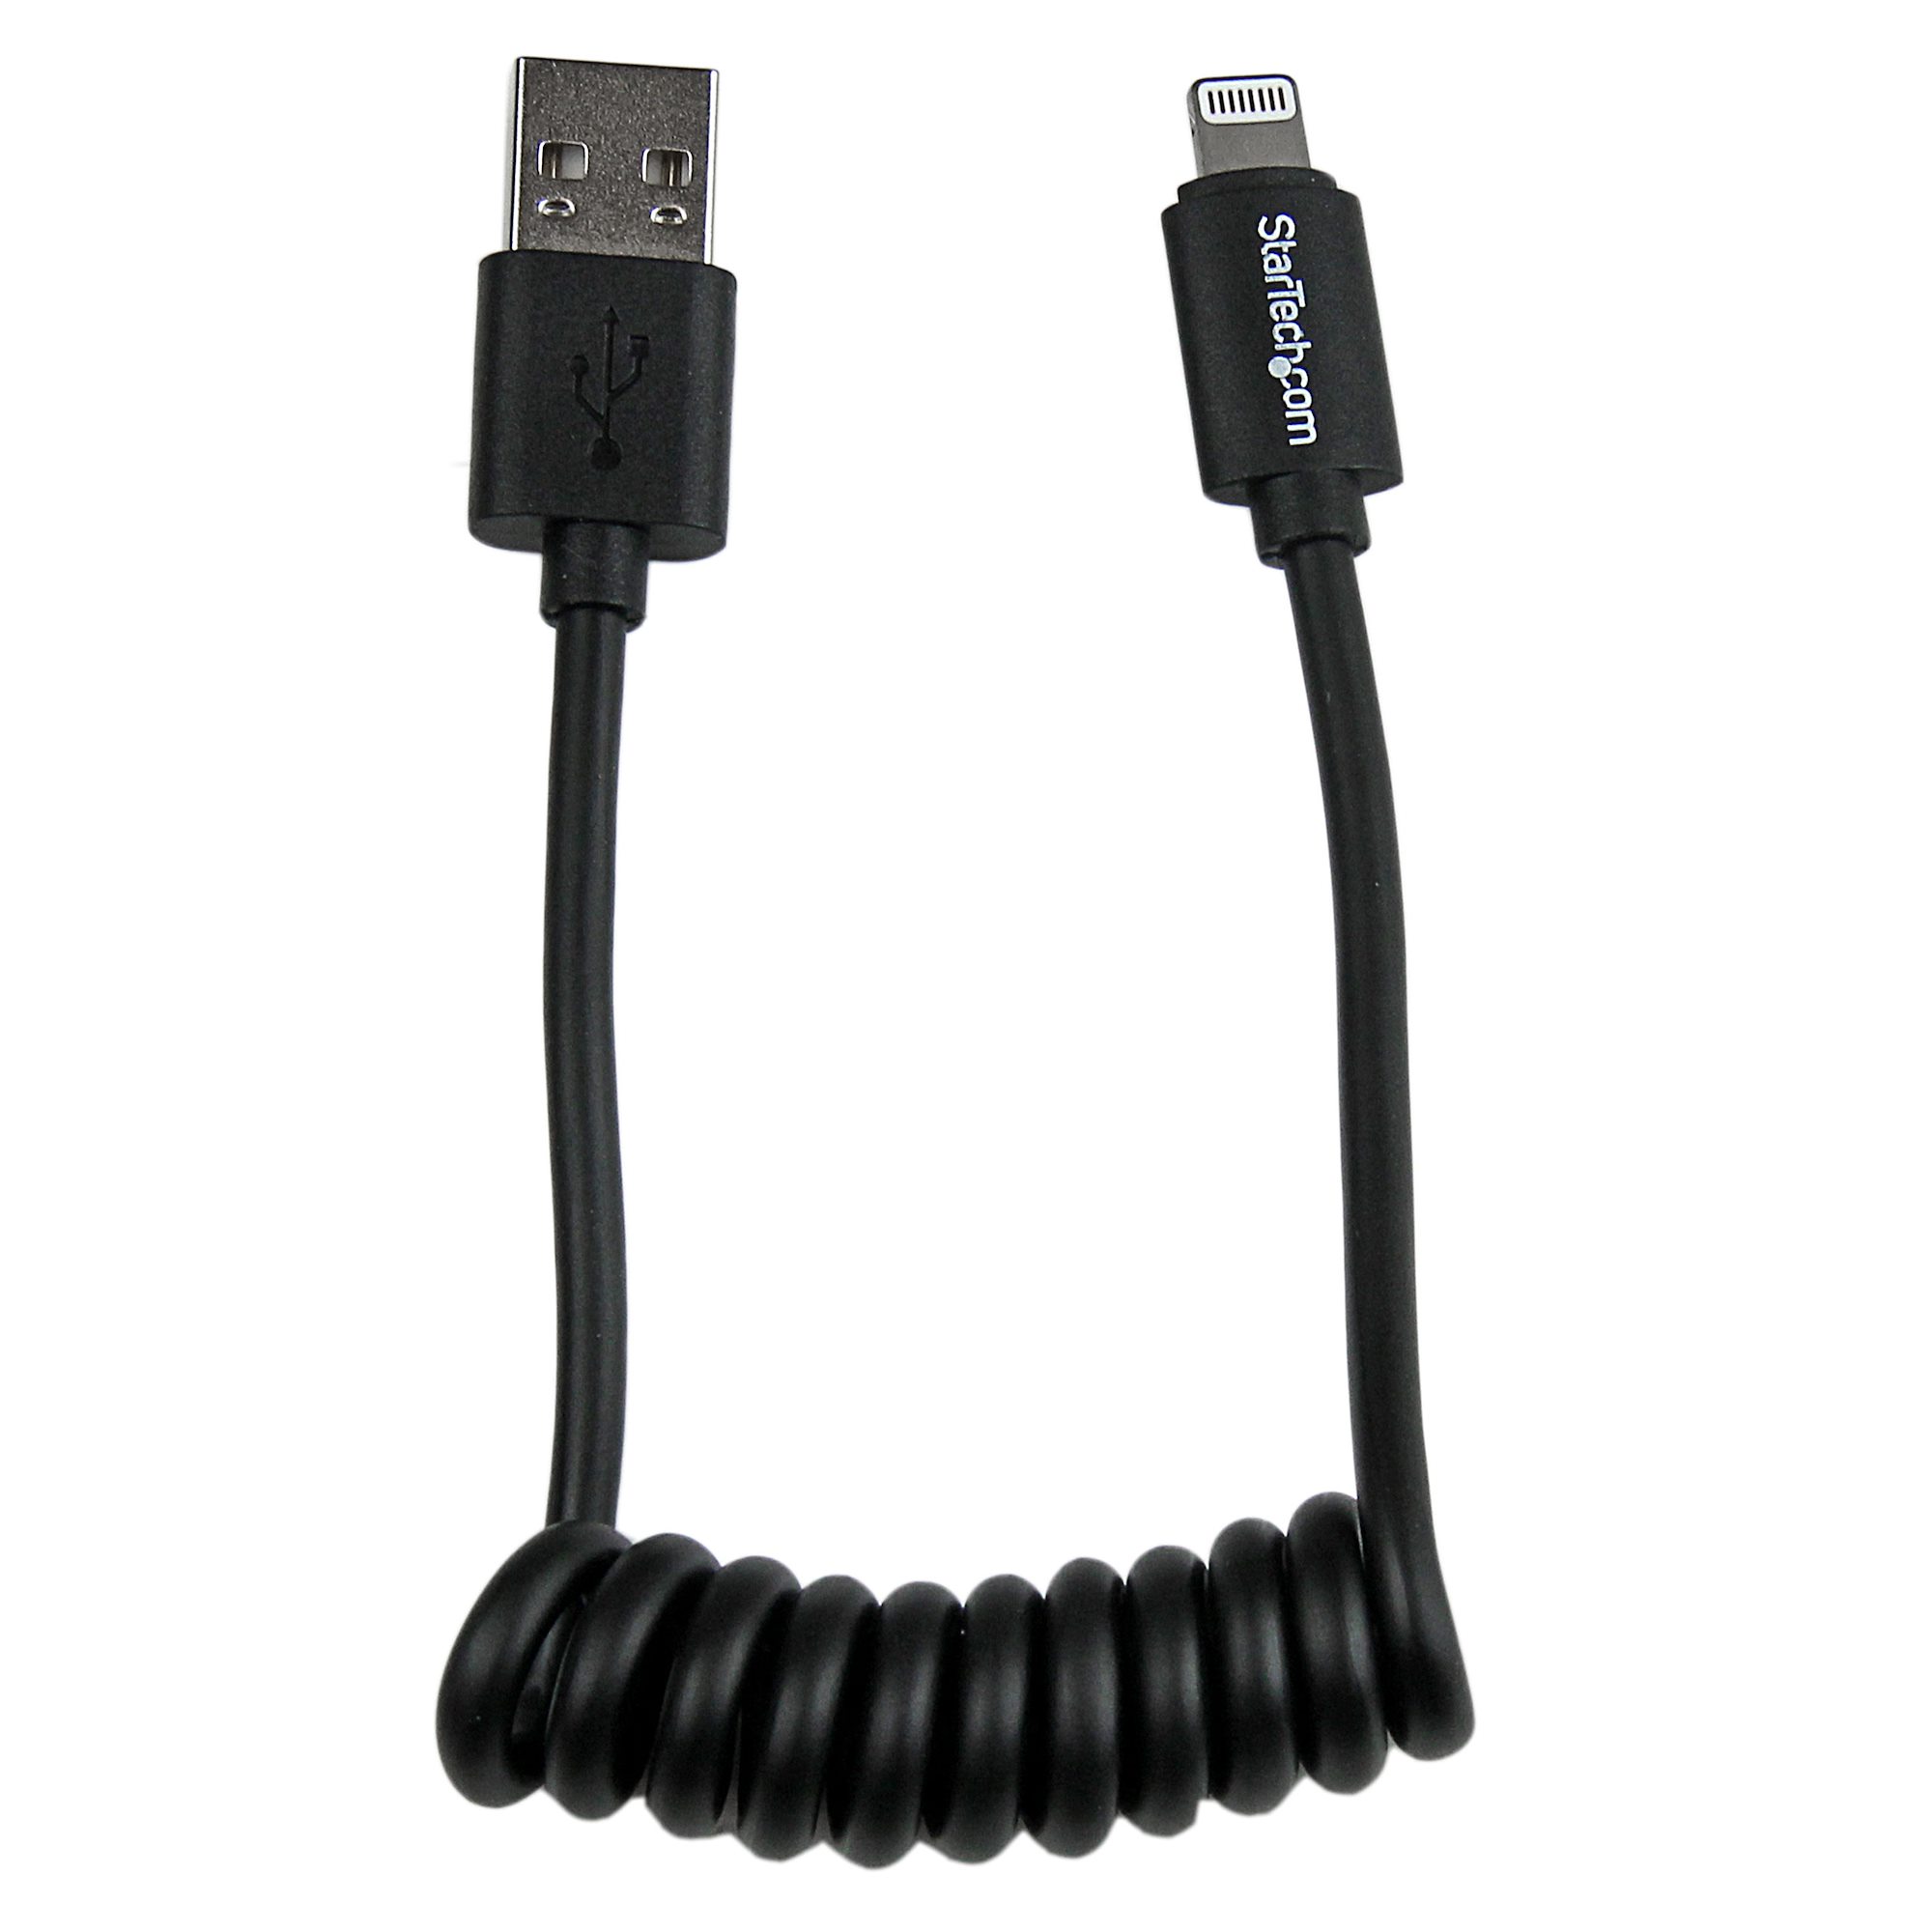 FAST CHARGE & Data Short Lightning Cable for iPhone iPad Coil Spiral Easy Tidy 